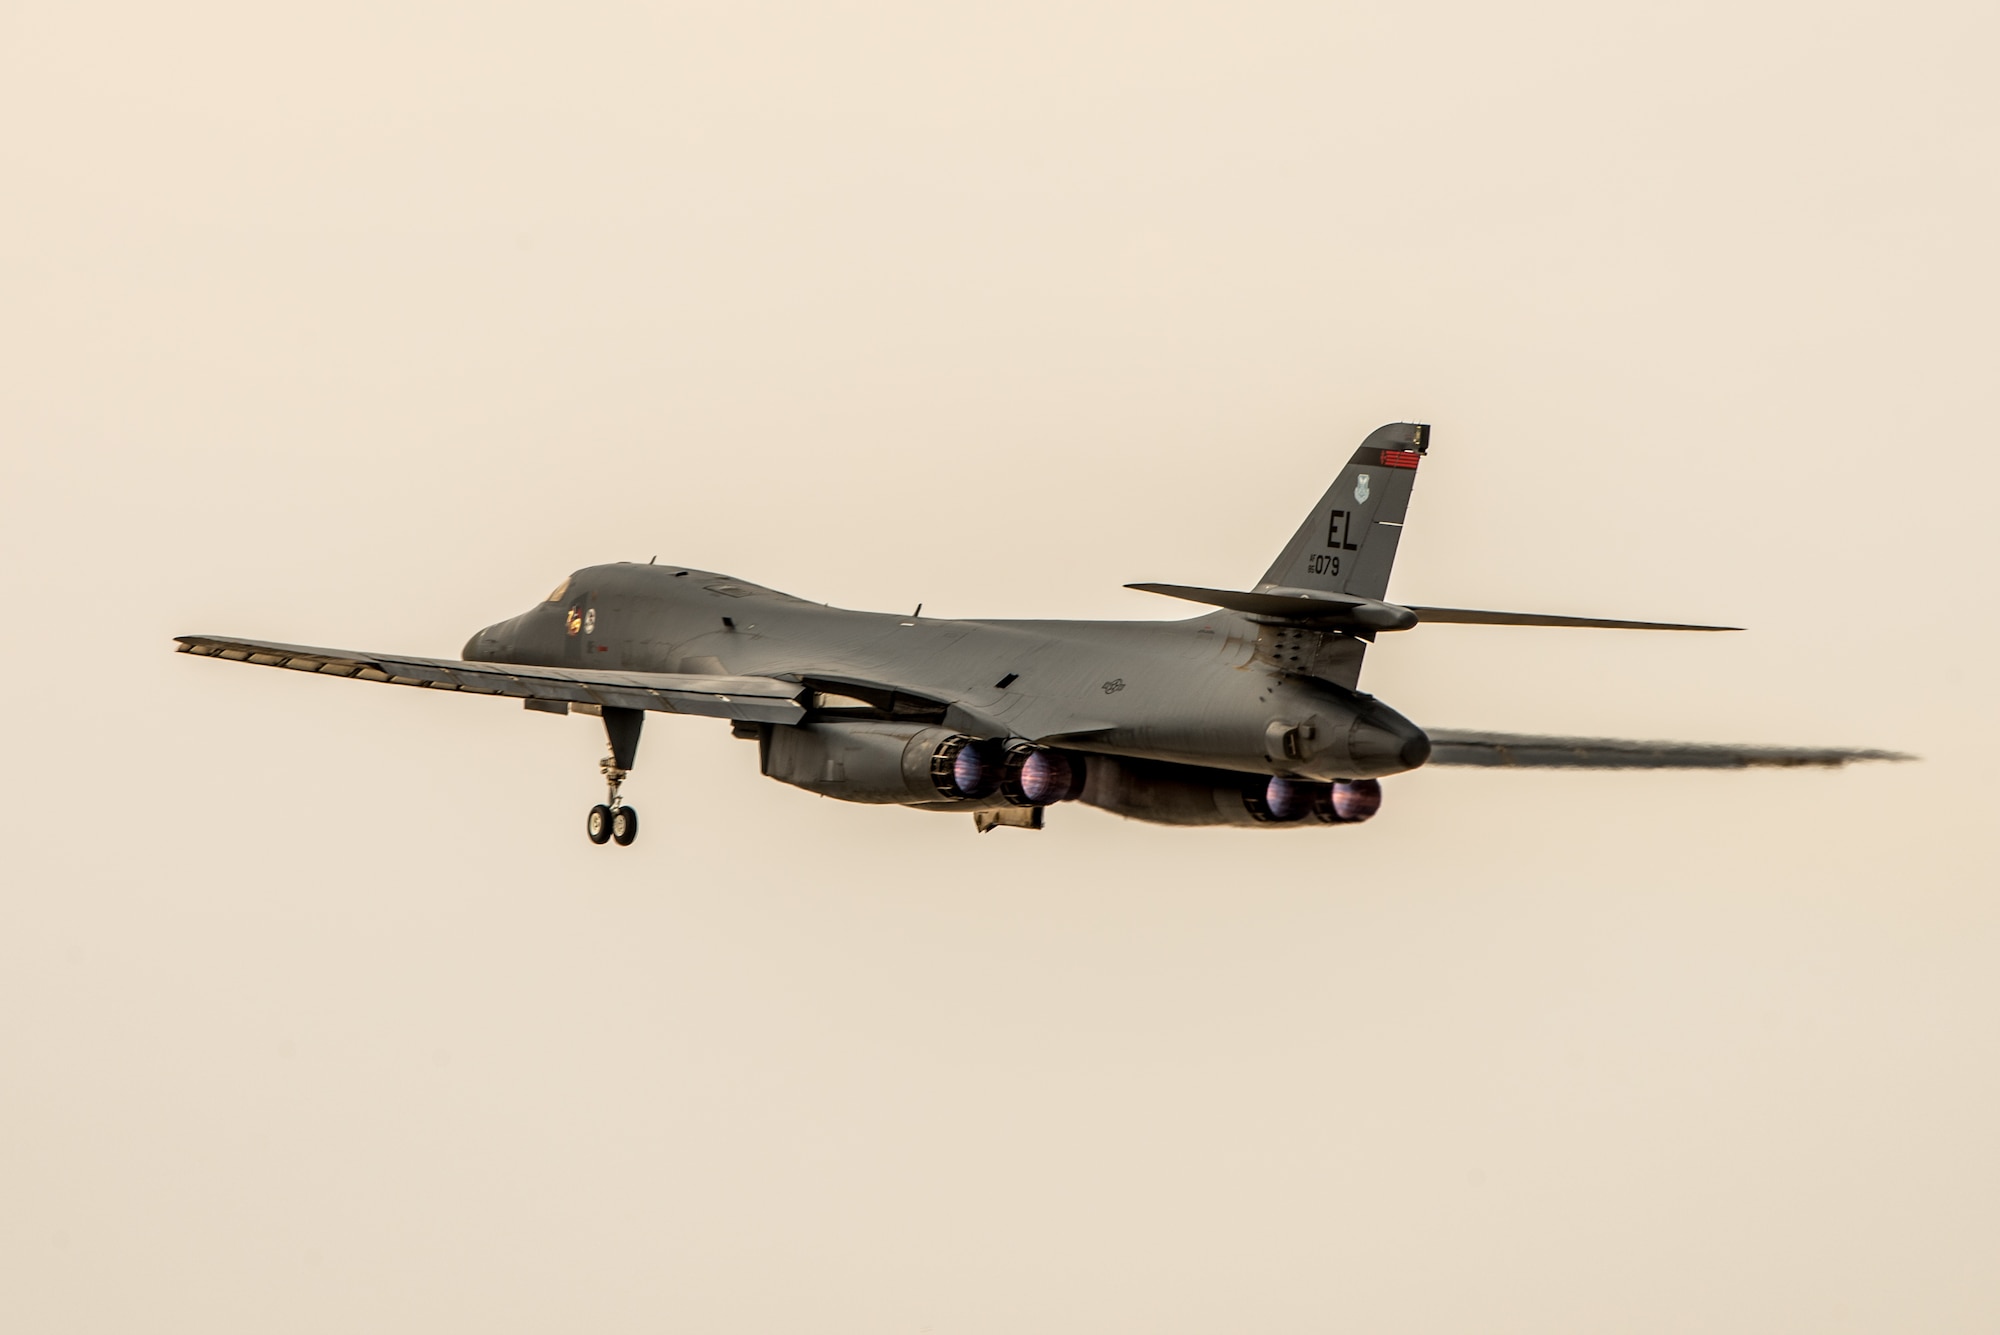 A 34th Expeditionary Bomb Squadron B-1B Lancer aircraft departs from Al Udeid Air Base, Qatar, May 19, 2018. The reputable B-1 returned to the area of operations in April to combat Taliban and other terrorist groups after two years of supporting the United States Pacific Command’s AOR. (U.S. Air Force photo by Staff Sgt. Joshua Horton)